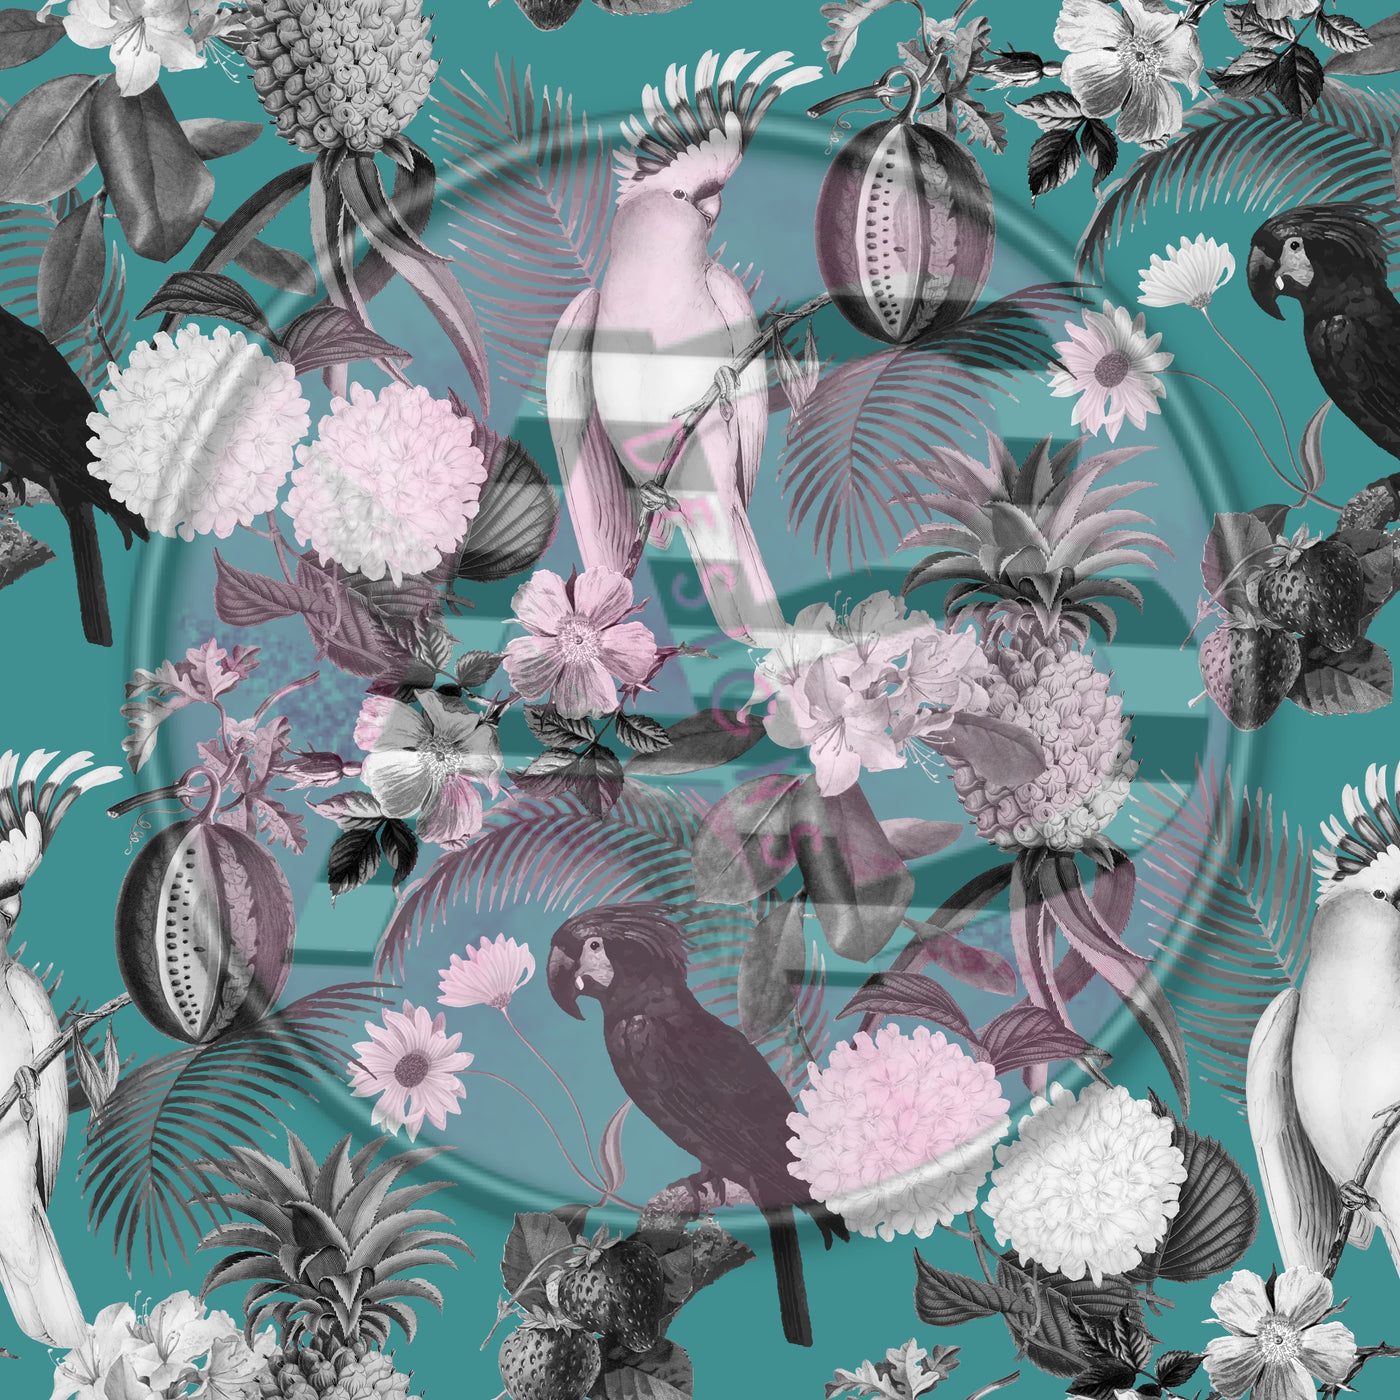 Adhesive Patterned Vinyl - Tropical 2108